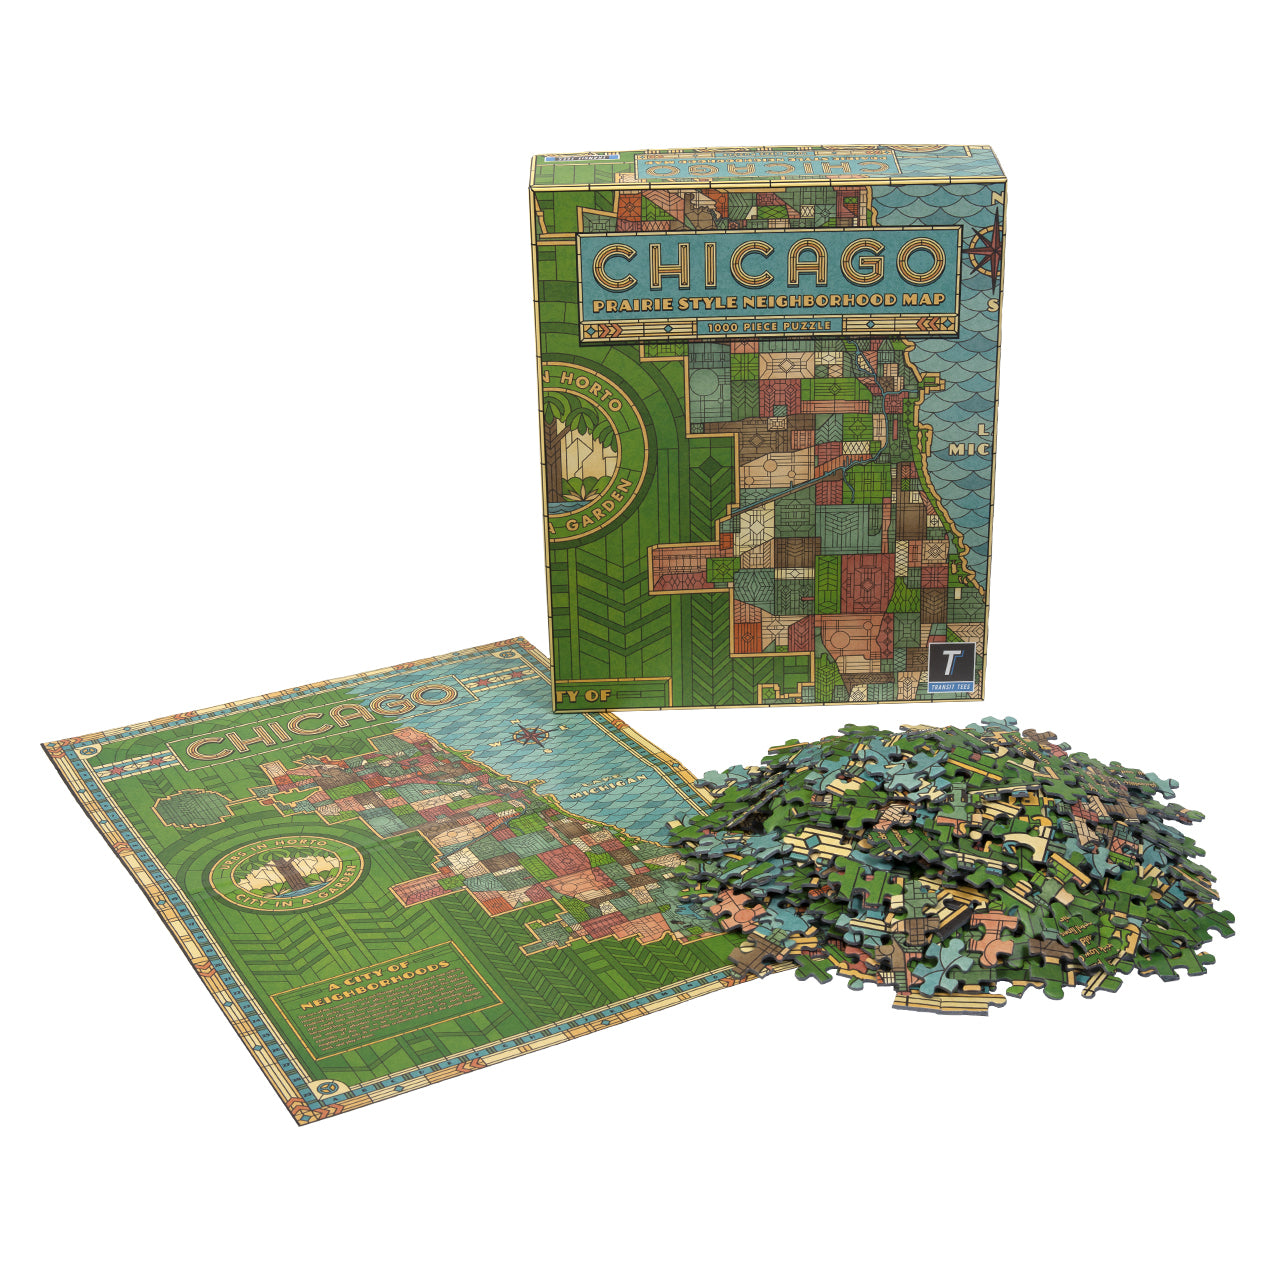 Chicago Prairie Style Stained Glass Neighborhood Map 1000 Piece Jigsaw Puzzle